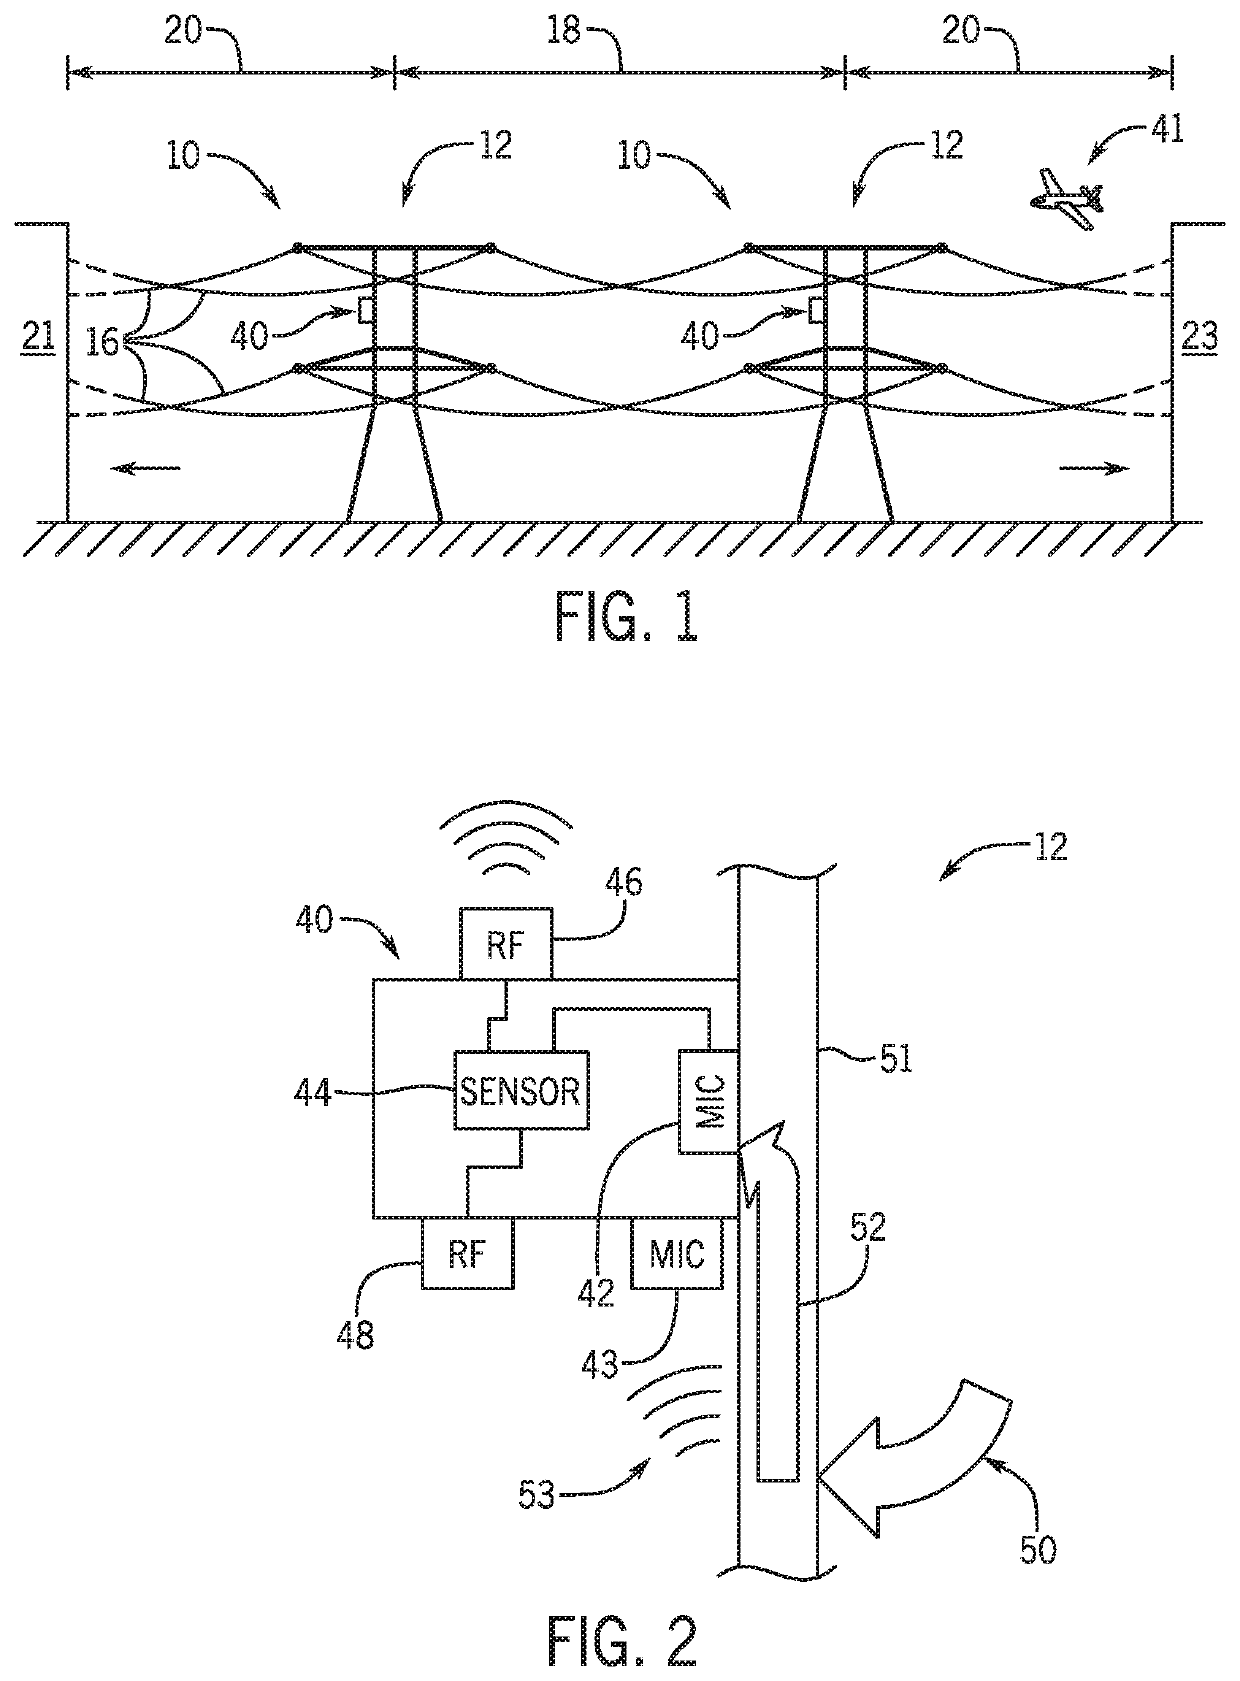 Acoustic tamper detection for metal structures